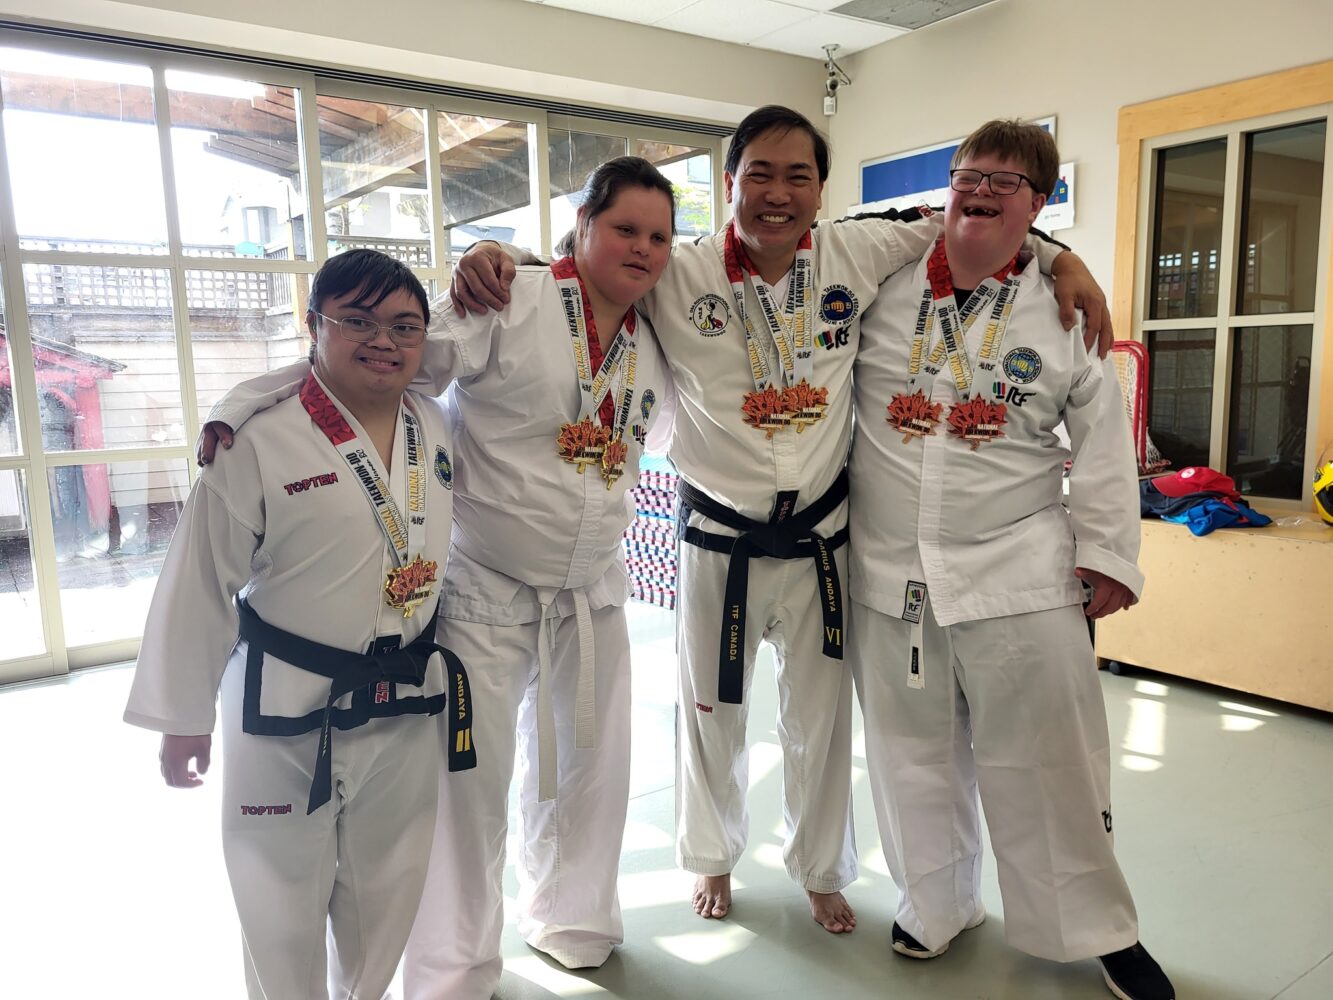 3 taekwondo students with Down syndrome pose with their instructor, all with Canadian championship medals around their necks